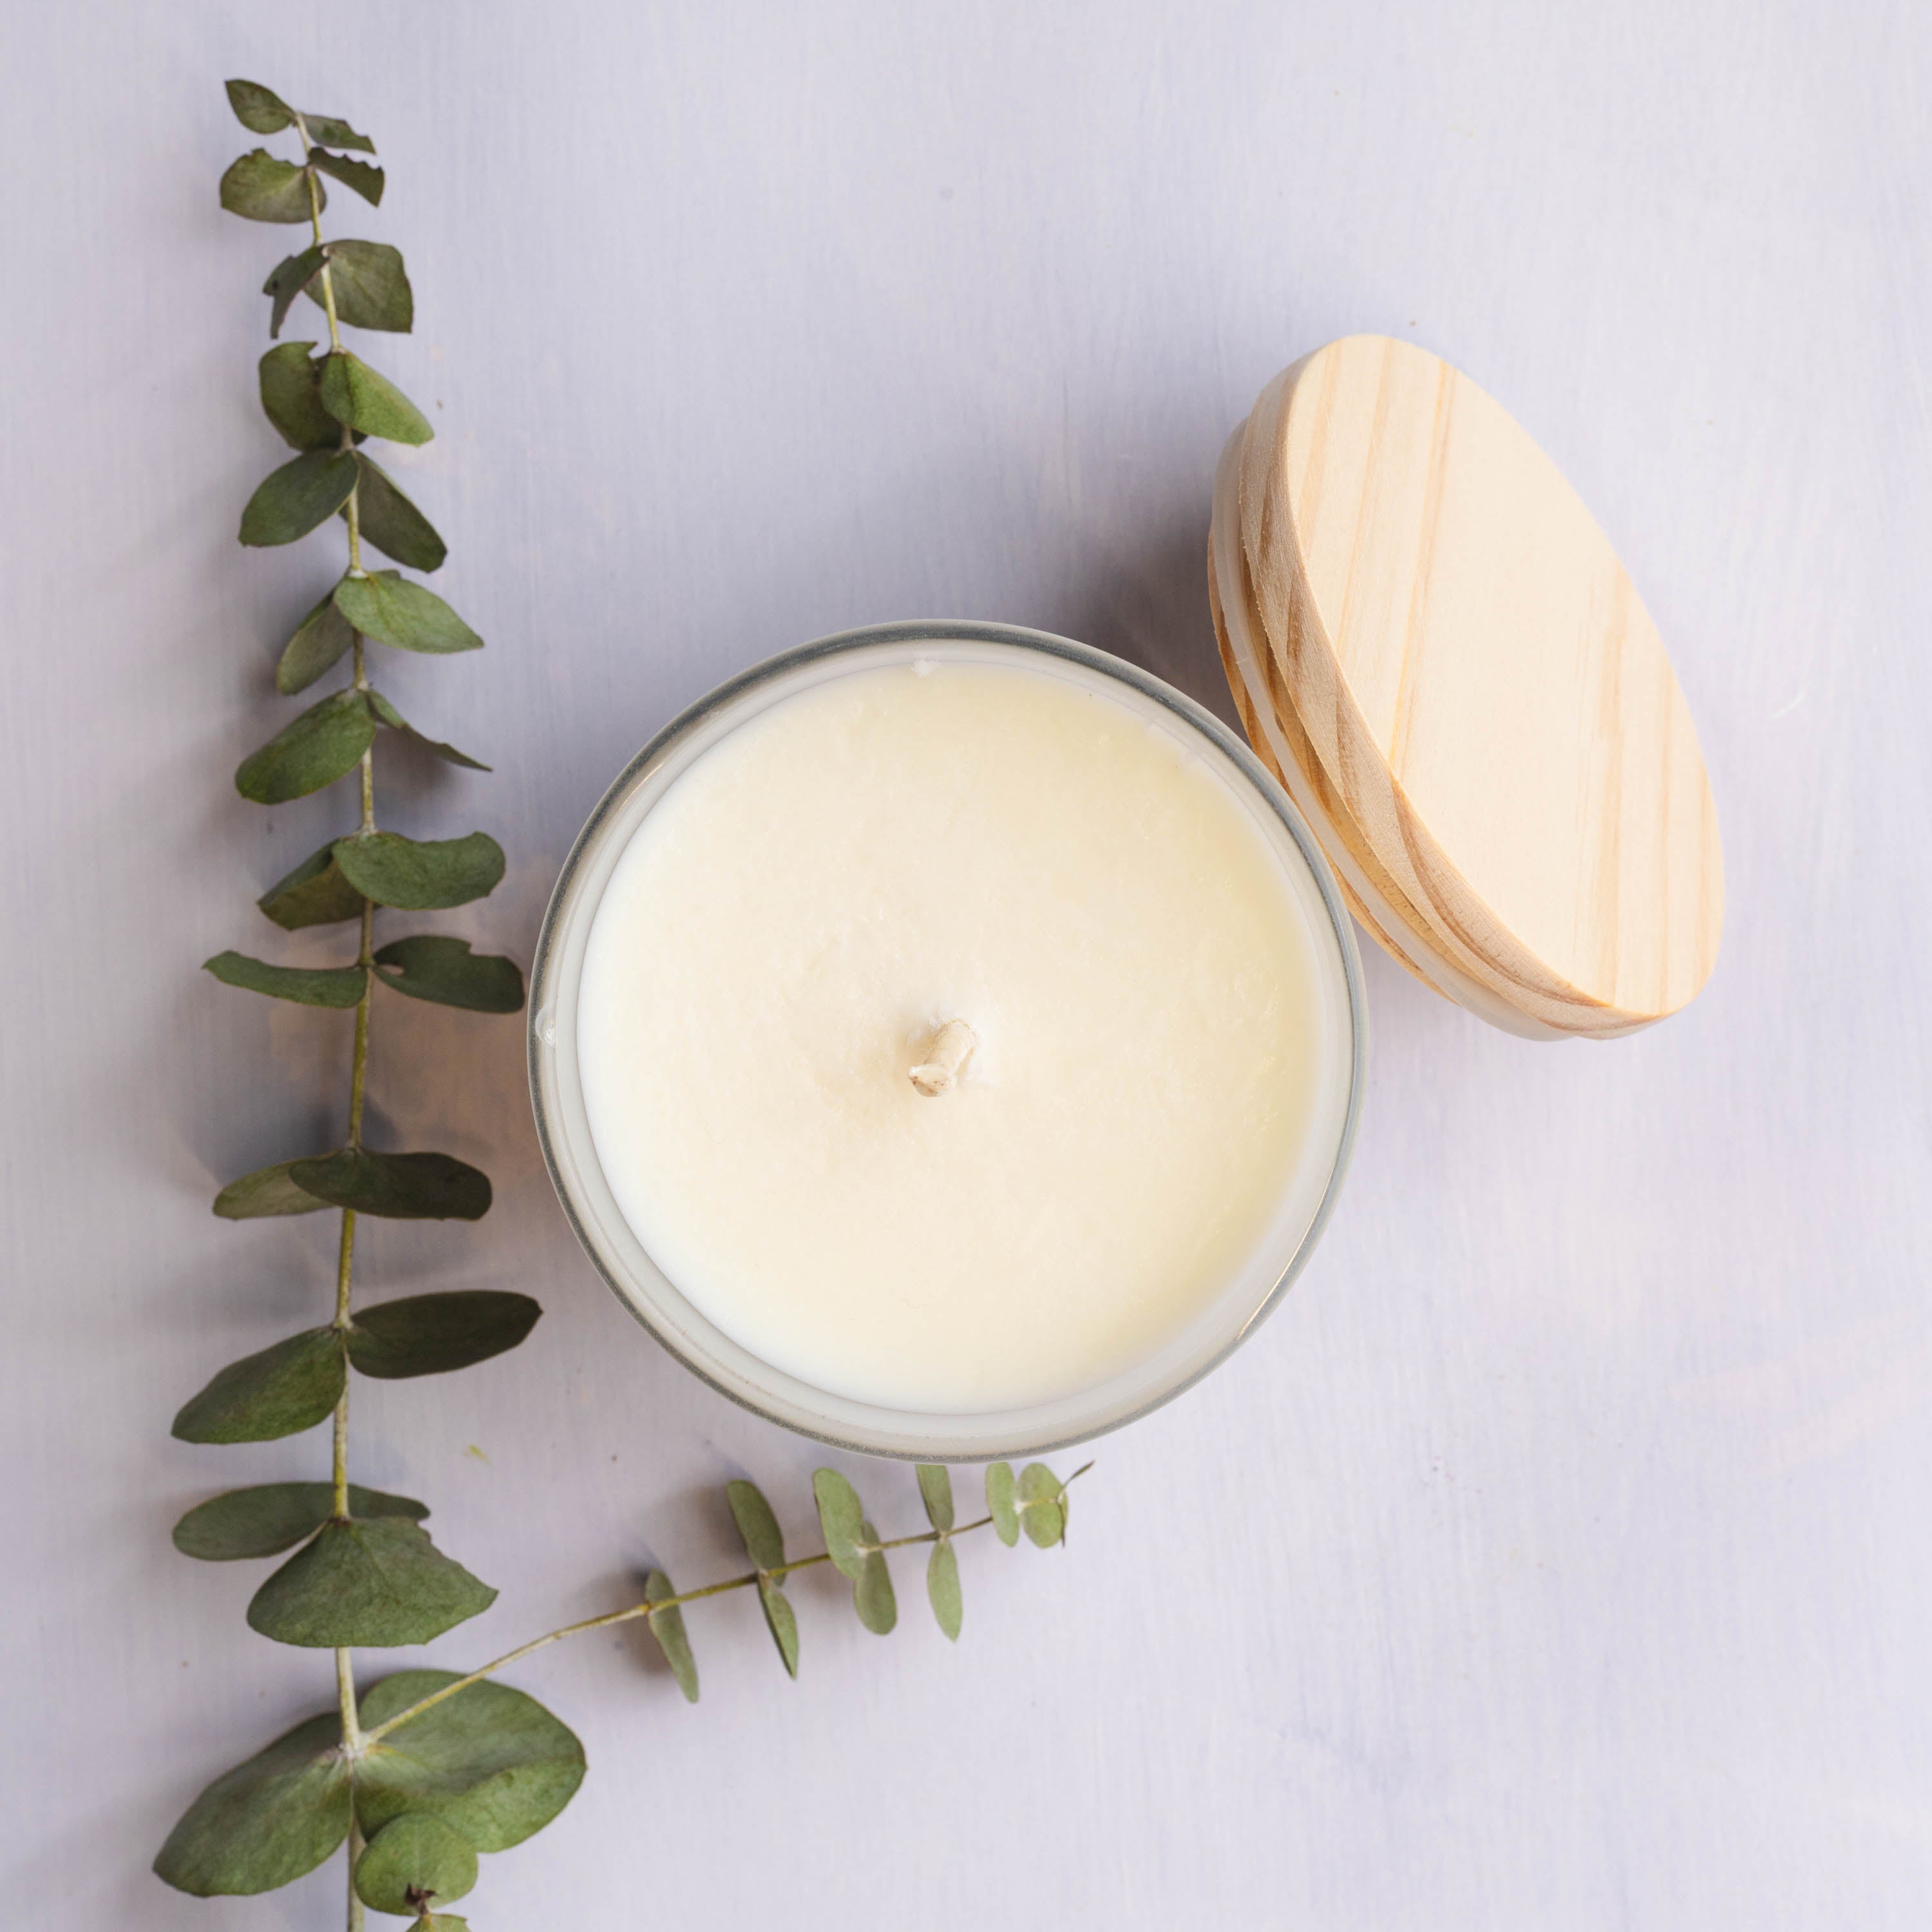 Essential Oil Soy Candle - Breathe